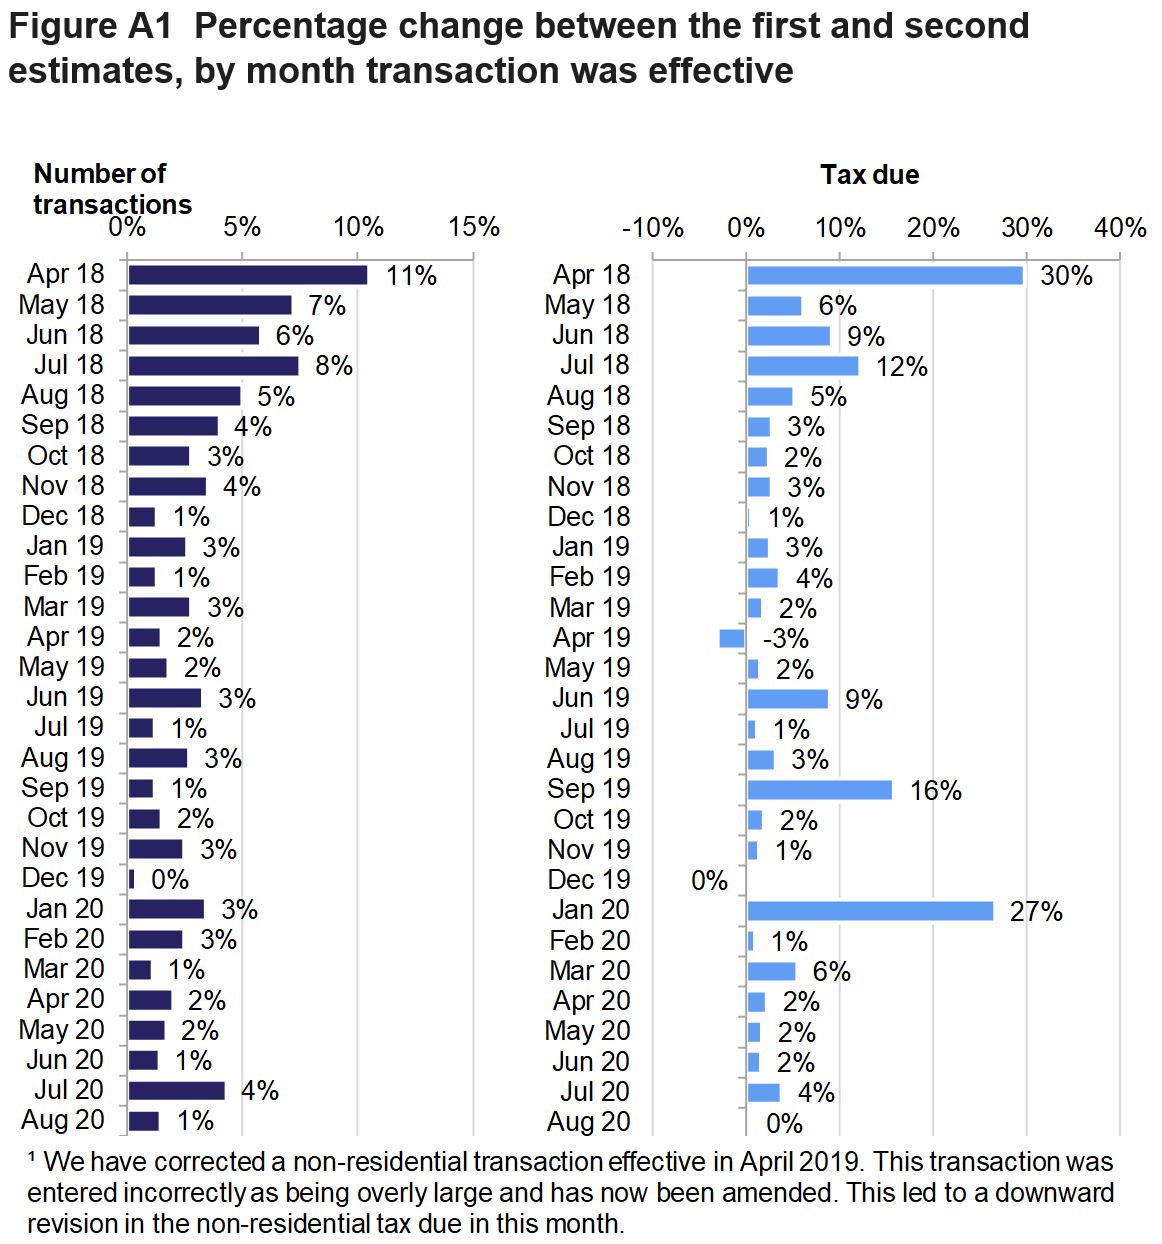 Figure A1 shows the percentage change between the first and second estimates, by month transaction was effective. The percentages are shown for the change in the number of transactions and the change in tax due.